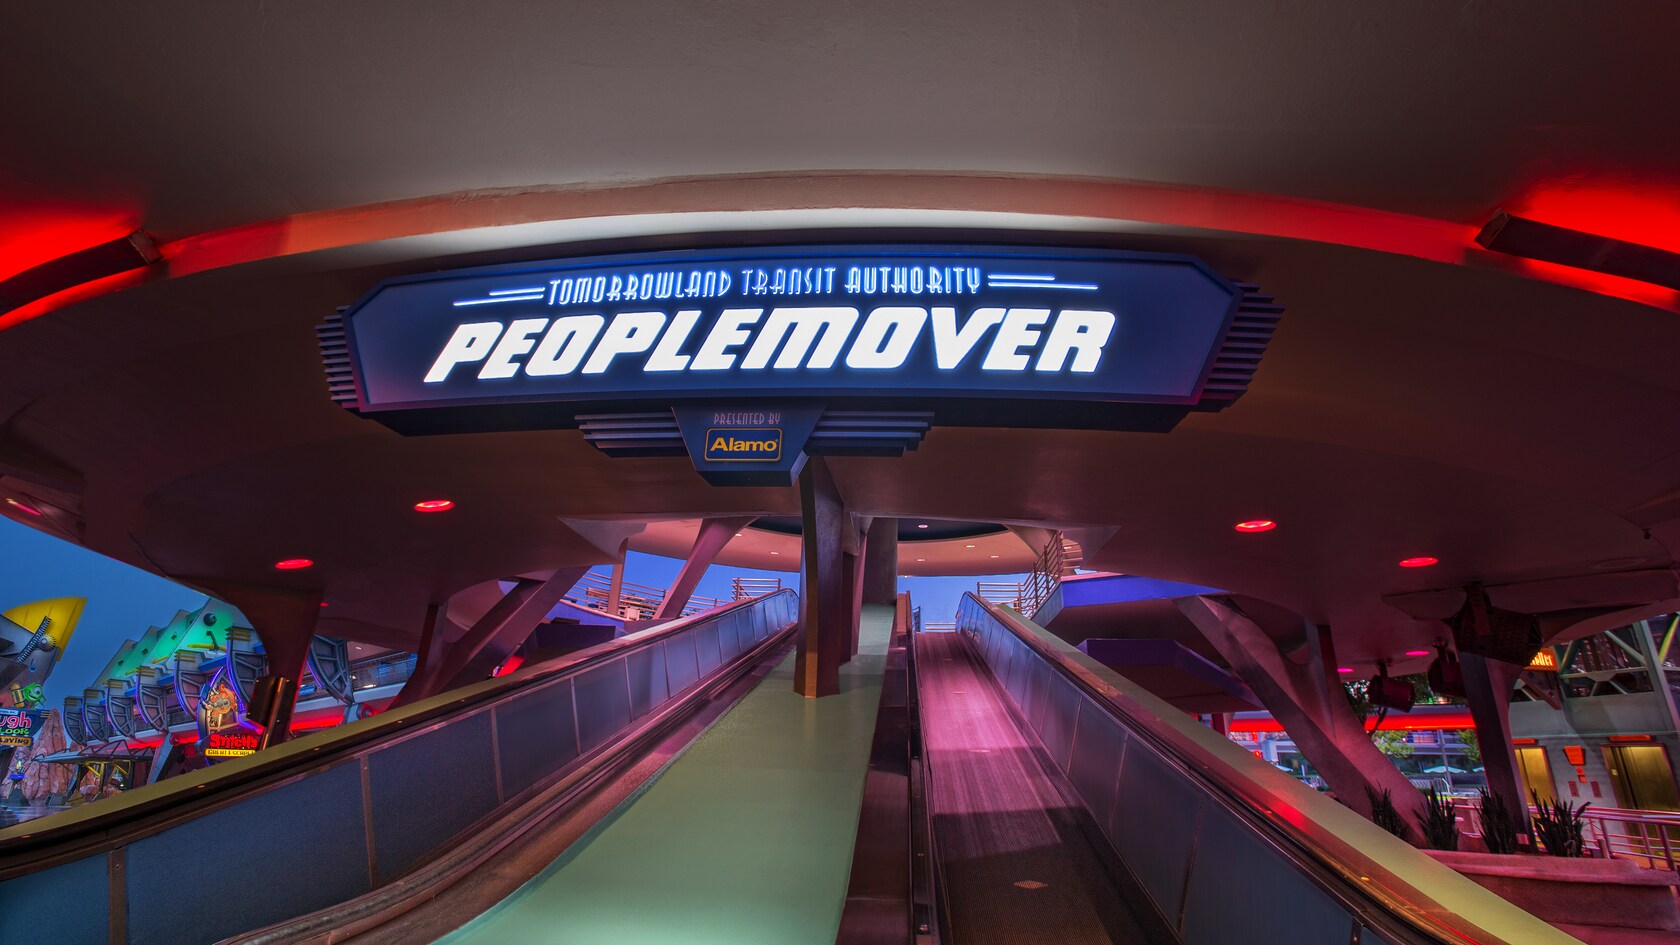 PeopleMover Re-Opening Date